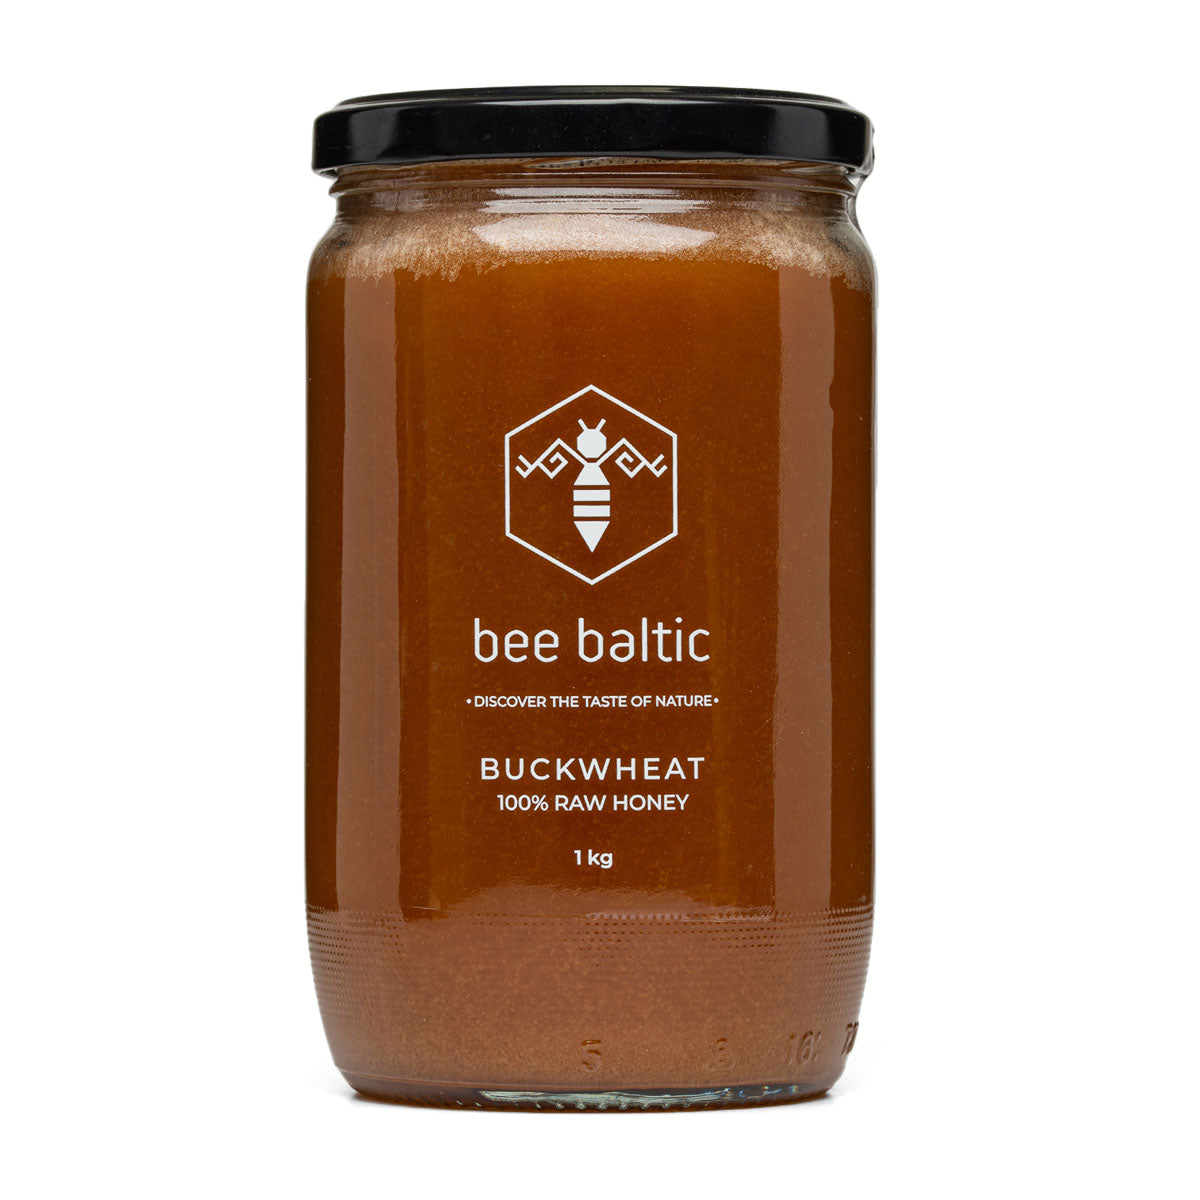 Buckwheat Raw Honey (1kg) | Bee Baltic | Raw Living UK | Bee Product | Raw Foods | Honeys | Bee Baltic&#39;s Raw Buckwheat Honey is known for its Anti-Oxidants, Iron Content &amp; Vitamins. It&#39;s mahogany colour perfectly complements its Rich &amp; Earthy Flavour.